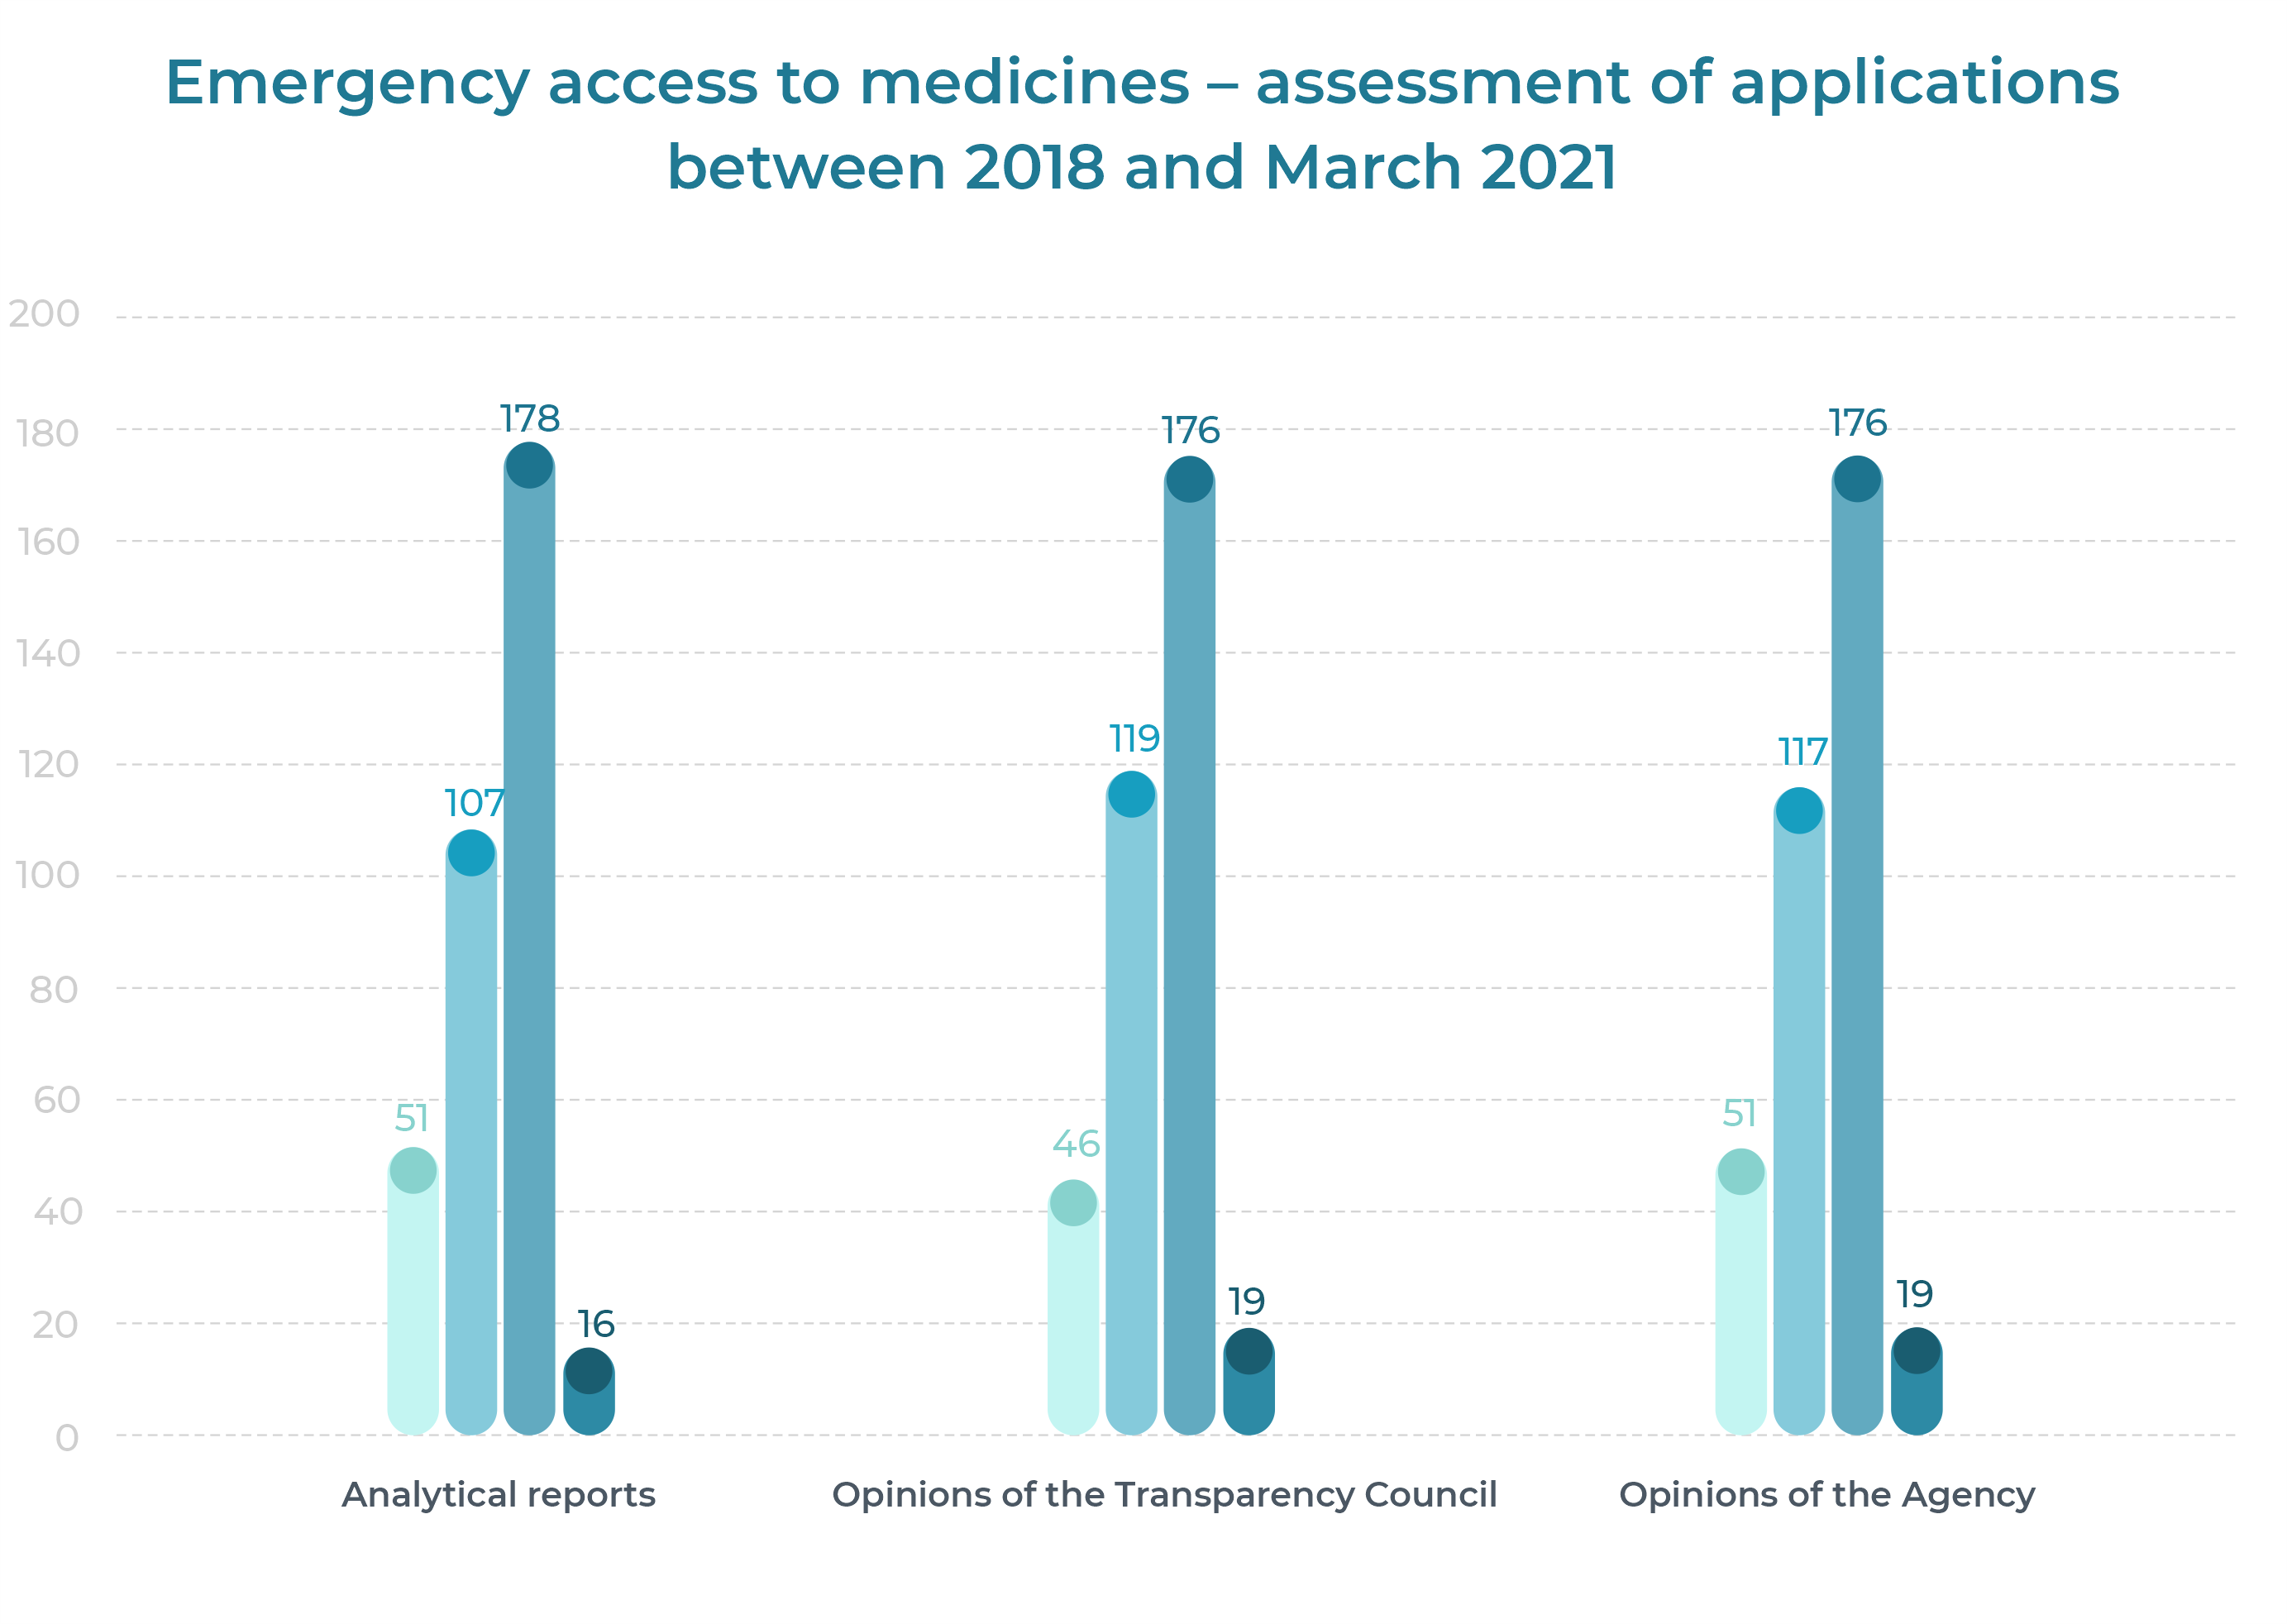 Emergency access to medicines - assessment of applications between 2018 and March 2021